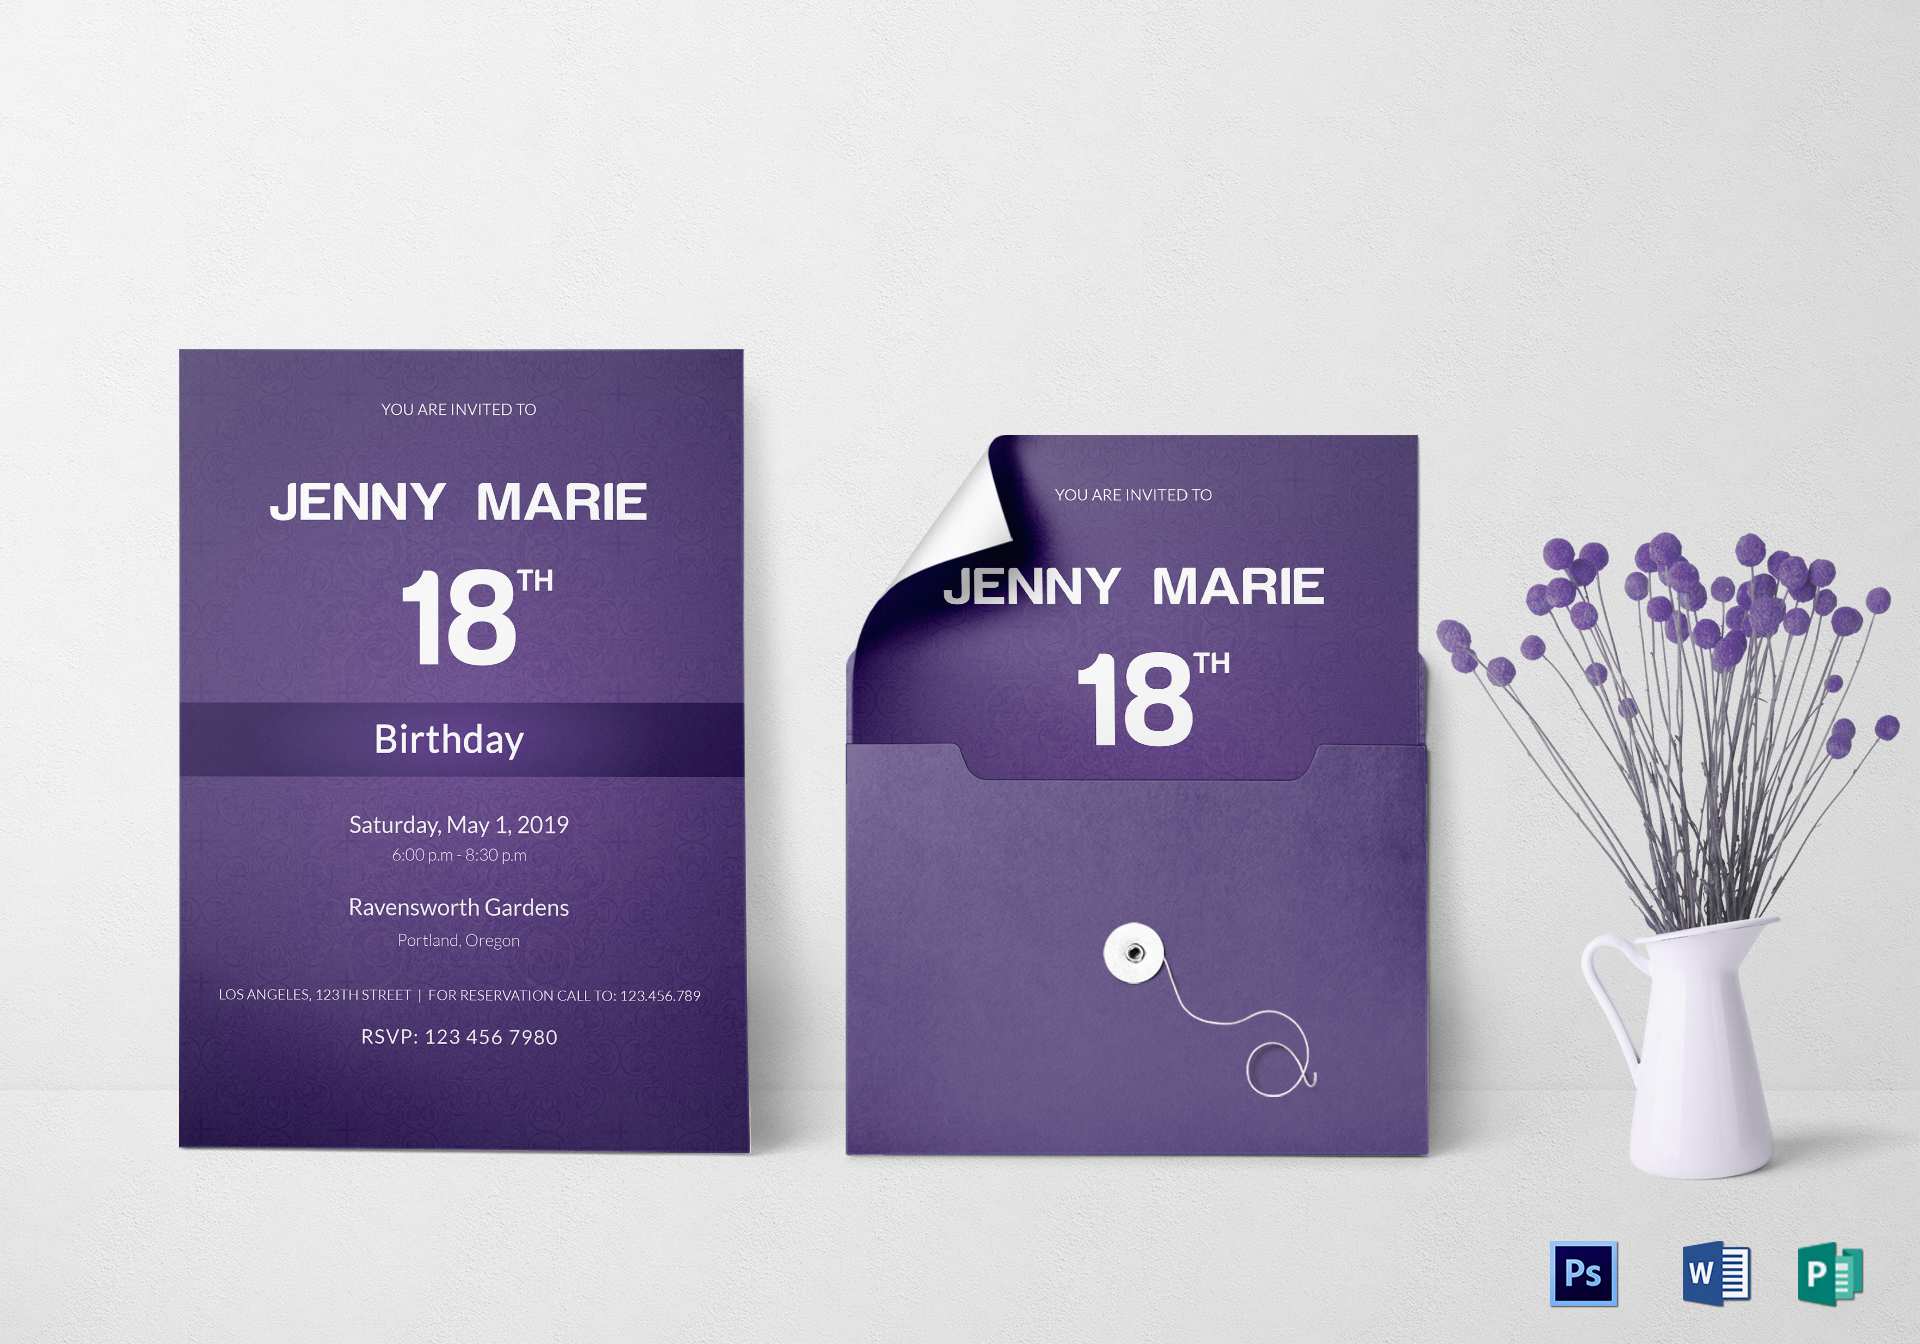 56 Blank Invitation Card Format For An Event in Word by Invitation Card Format For An Event